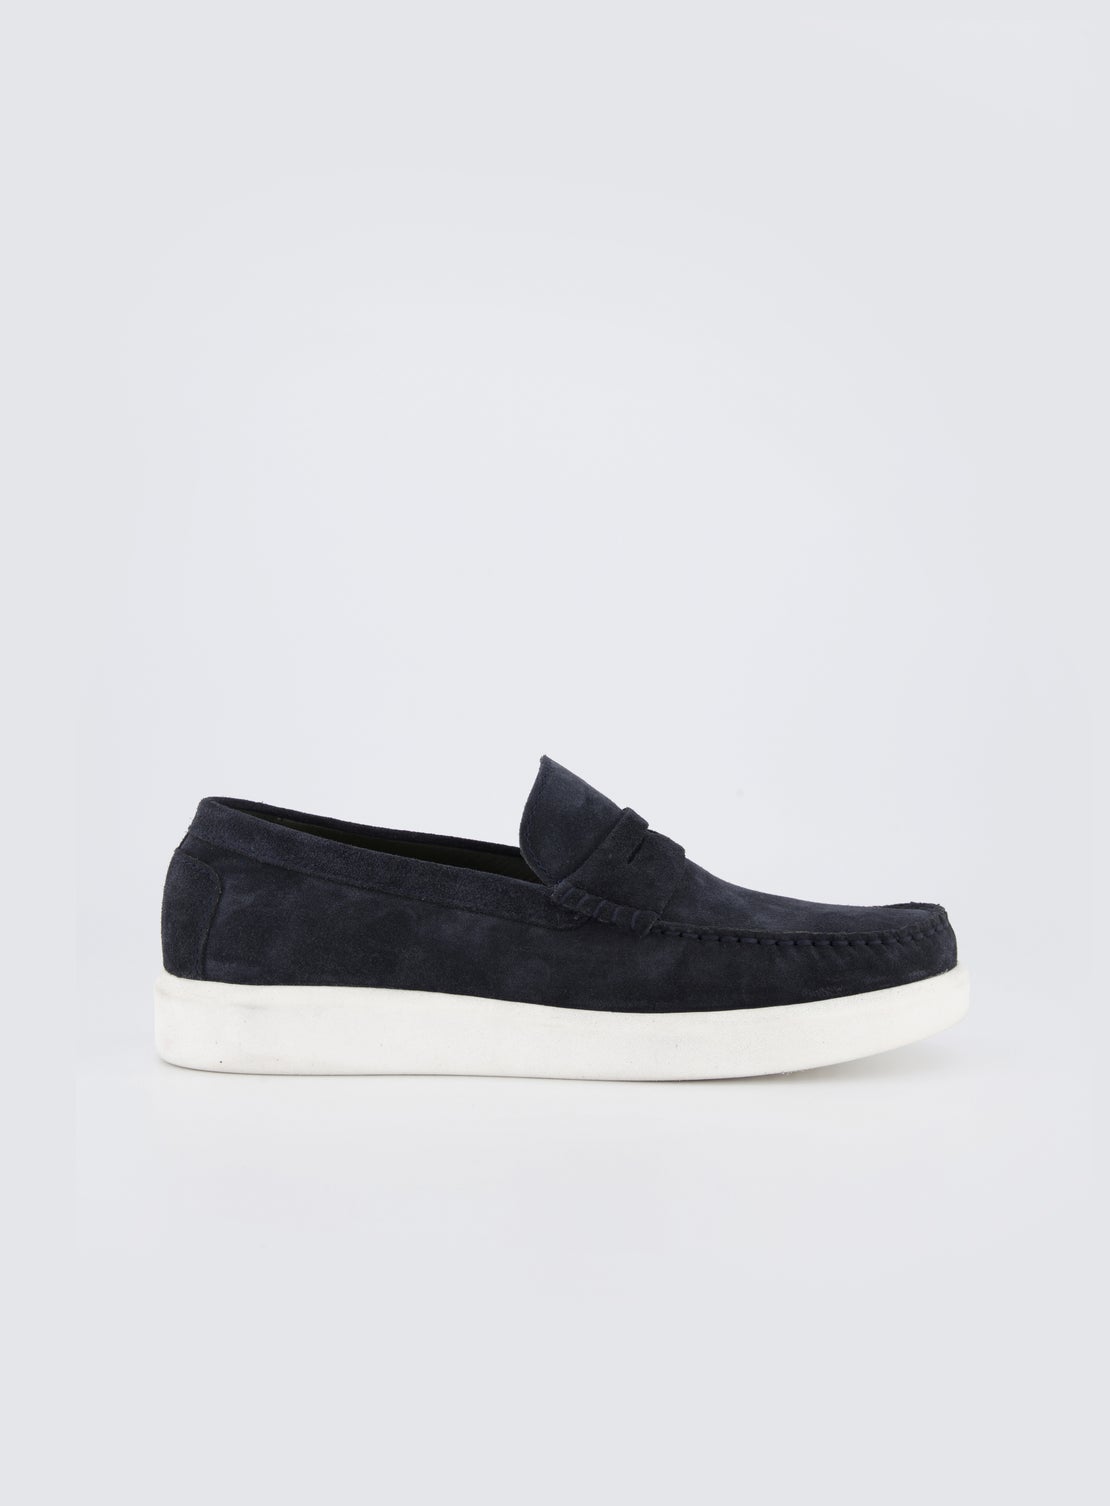 Bauhaus Blue Suede Casual Loafer